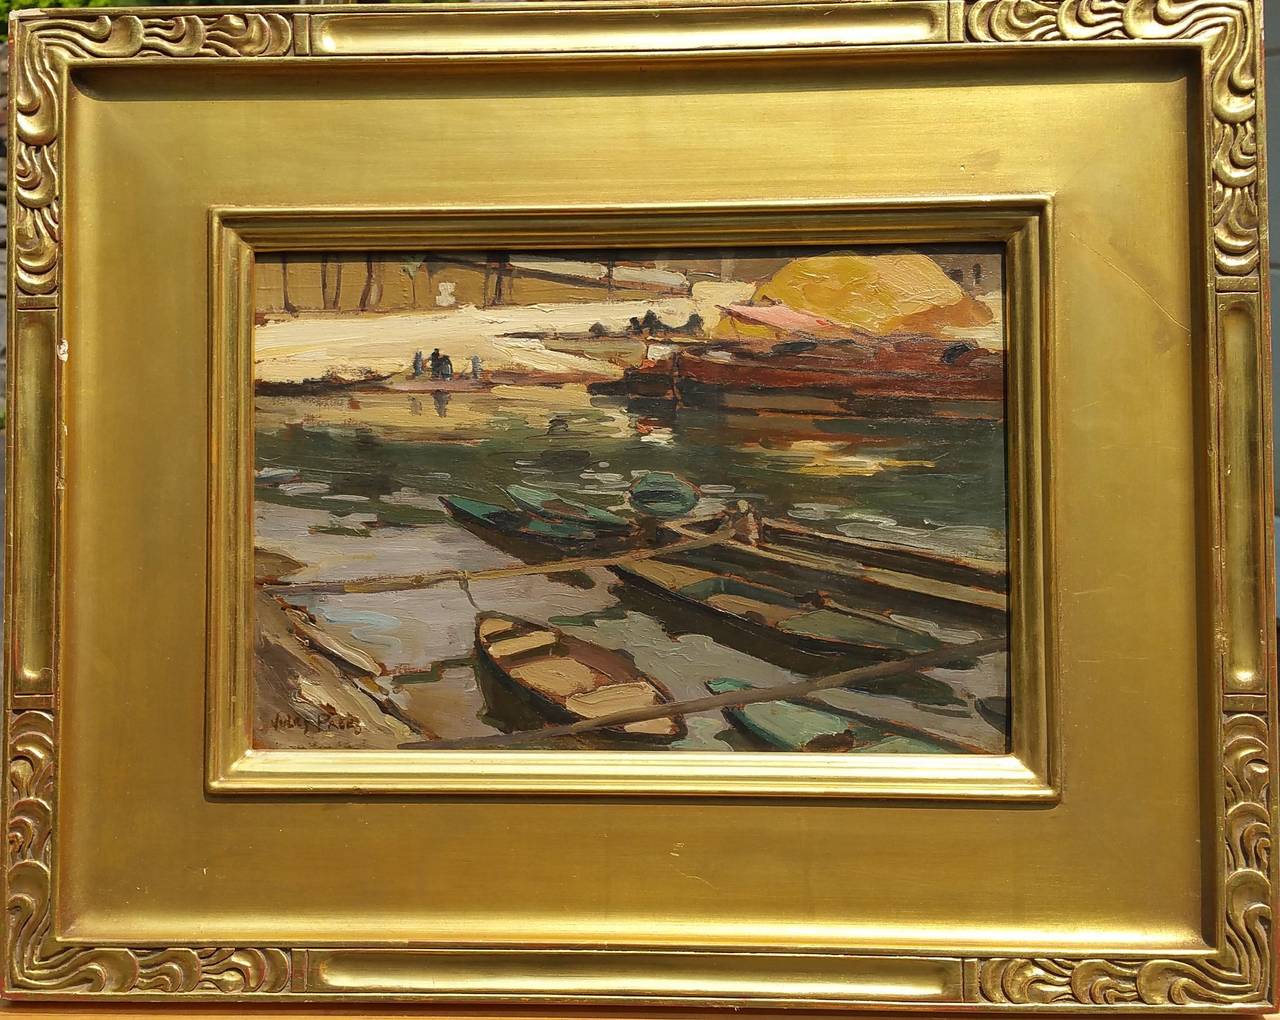 Sampans on the Seine River, Paris - Painting by Jules Pages